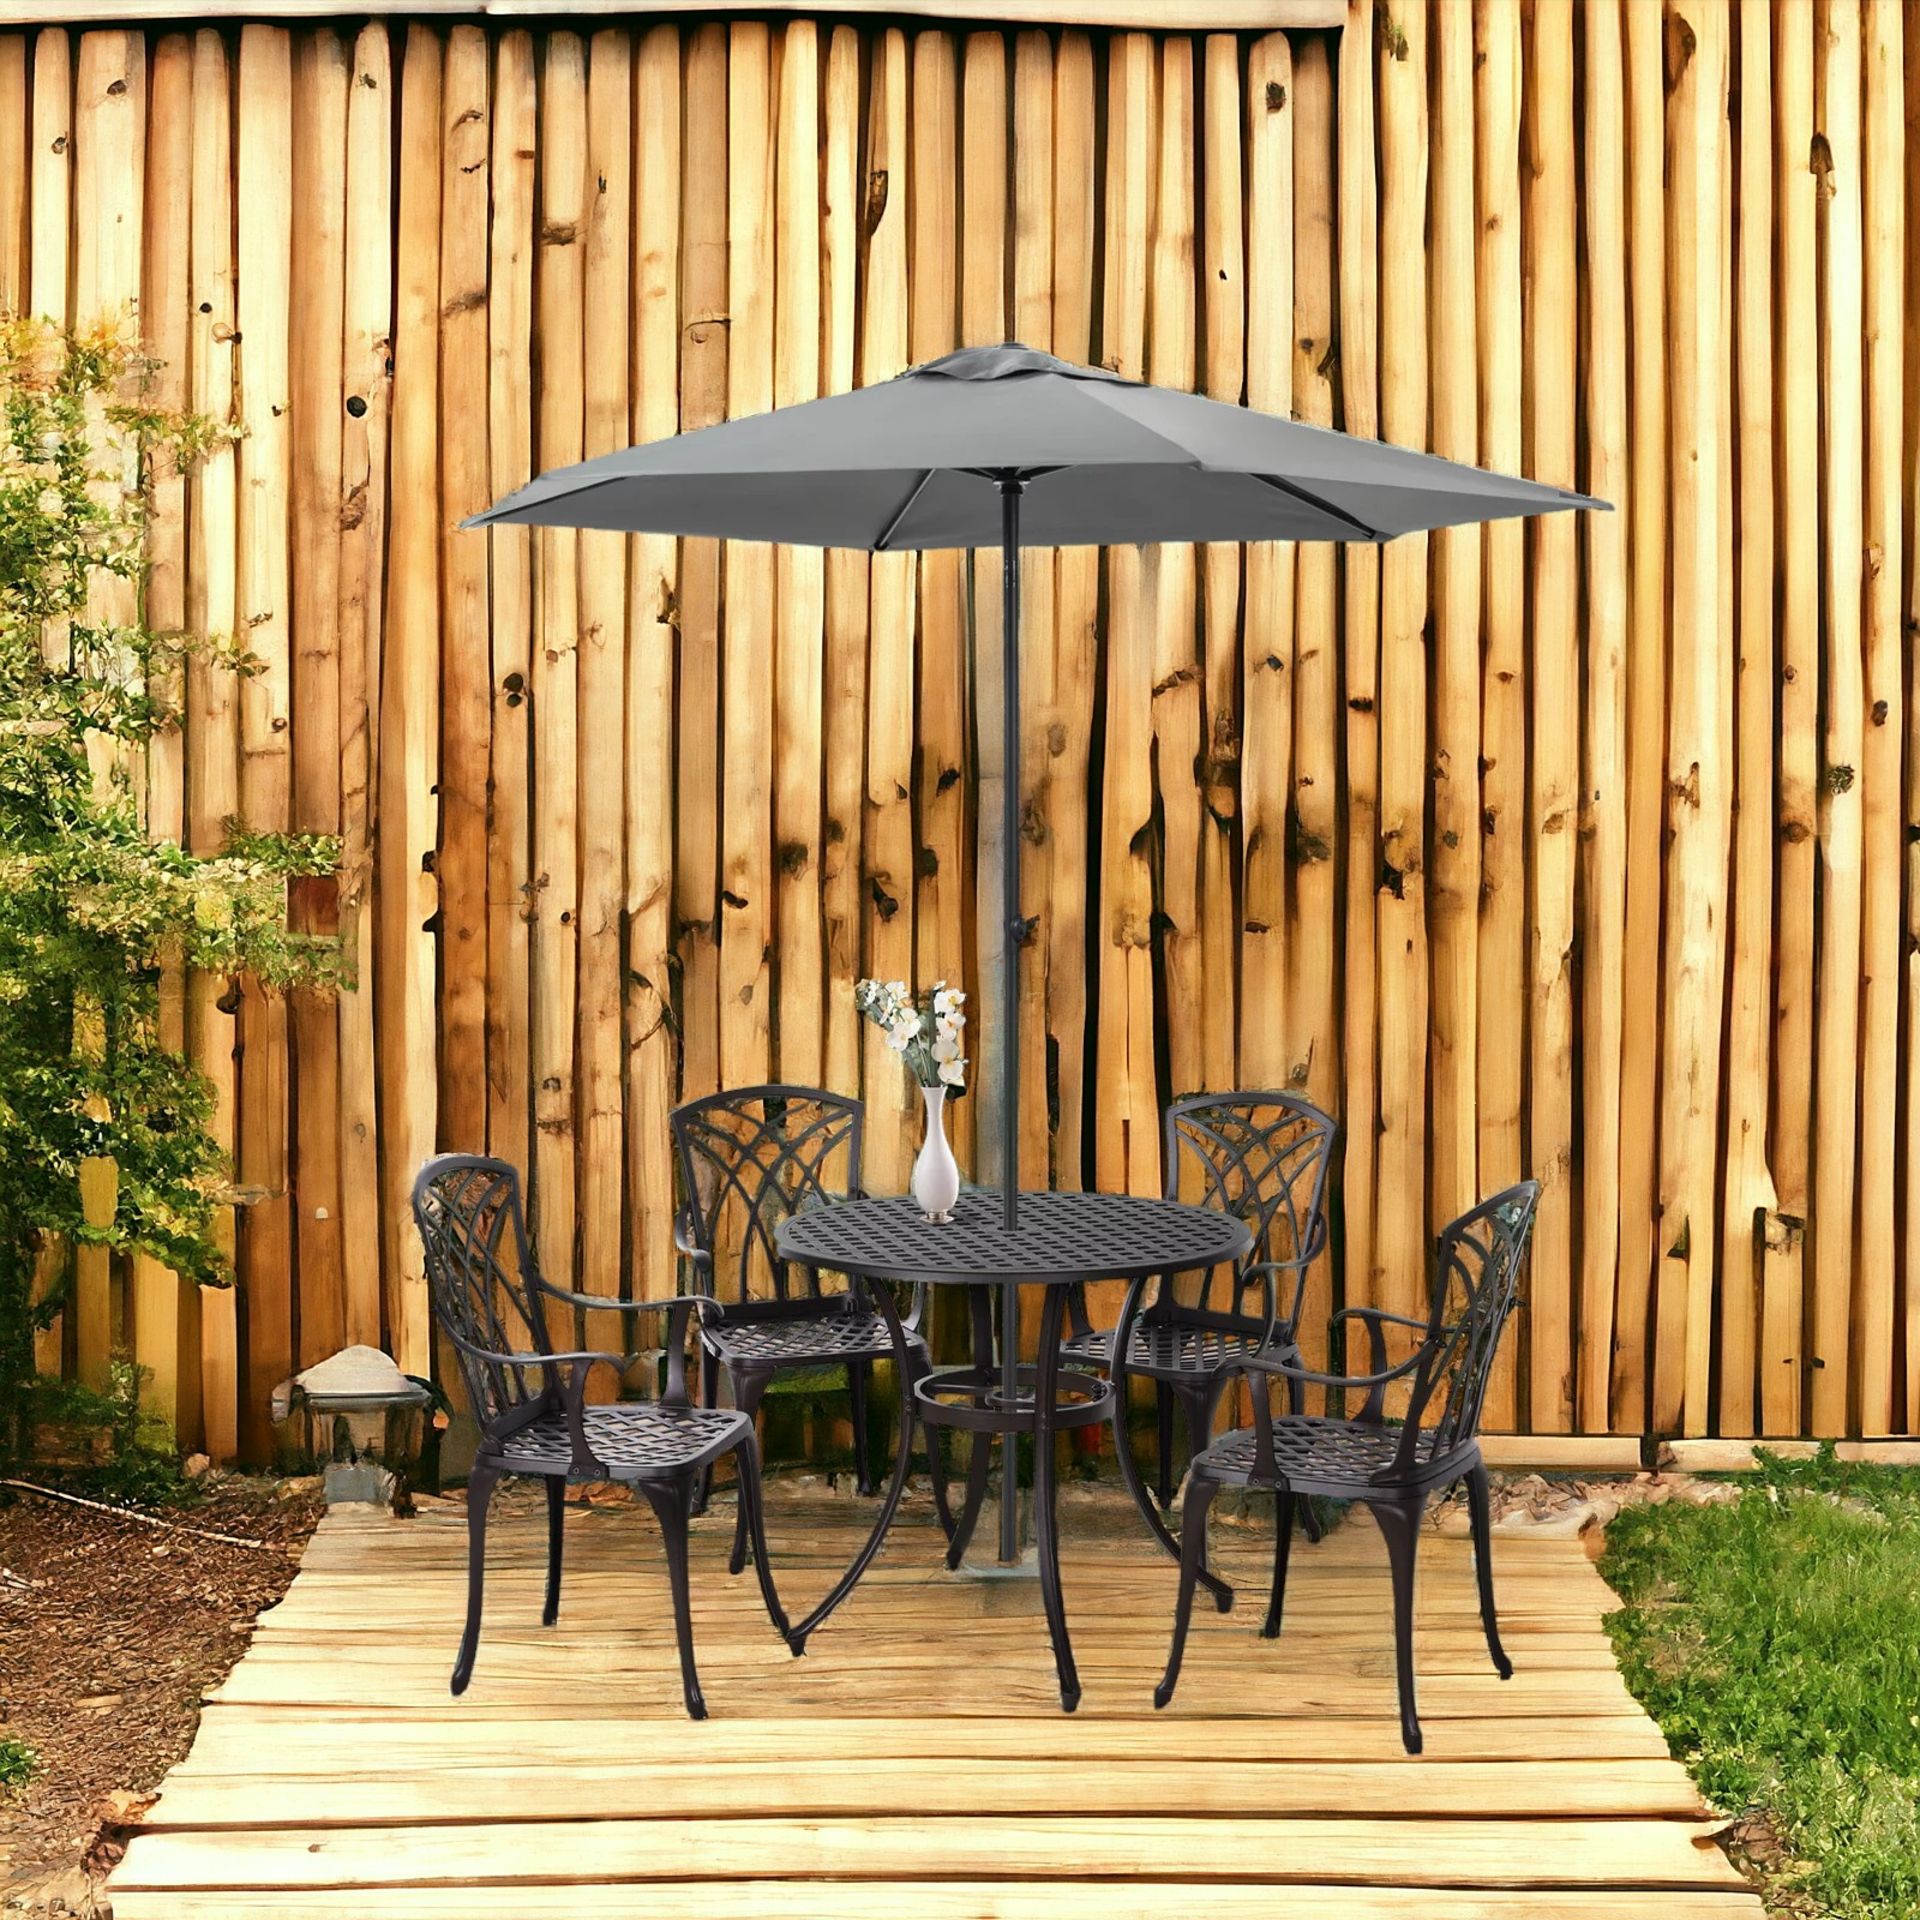 FREE DELIVERY-BRAND NEW 5 PCS COFFEE TABLE CHAIRS OUTDOOR GARDEN FURNITURE SET W/ - Image 3 of 3